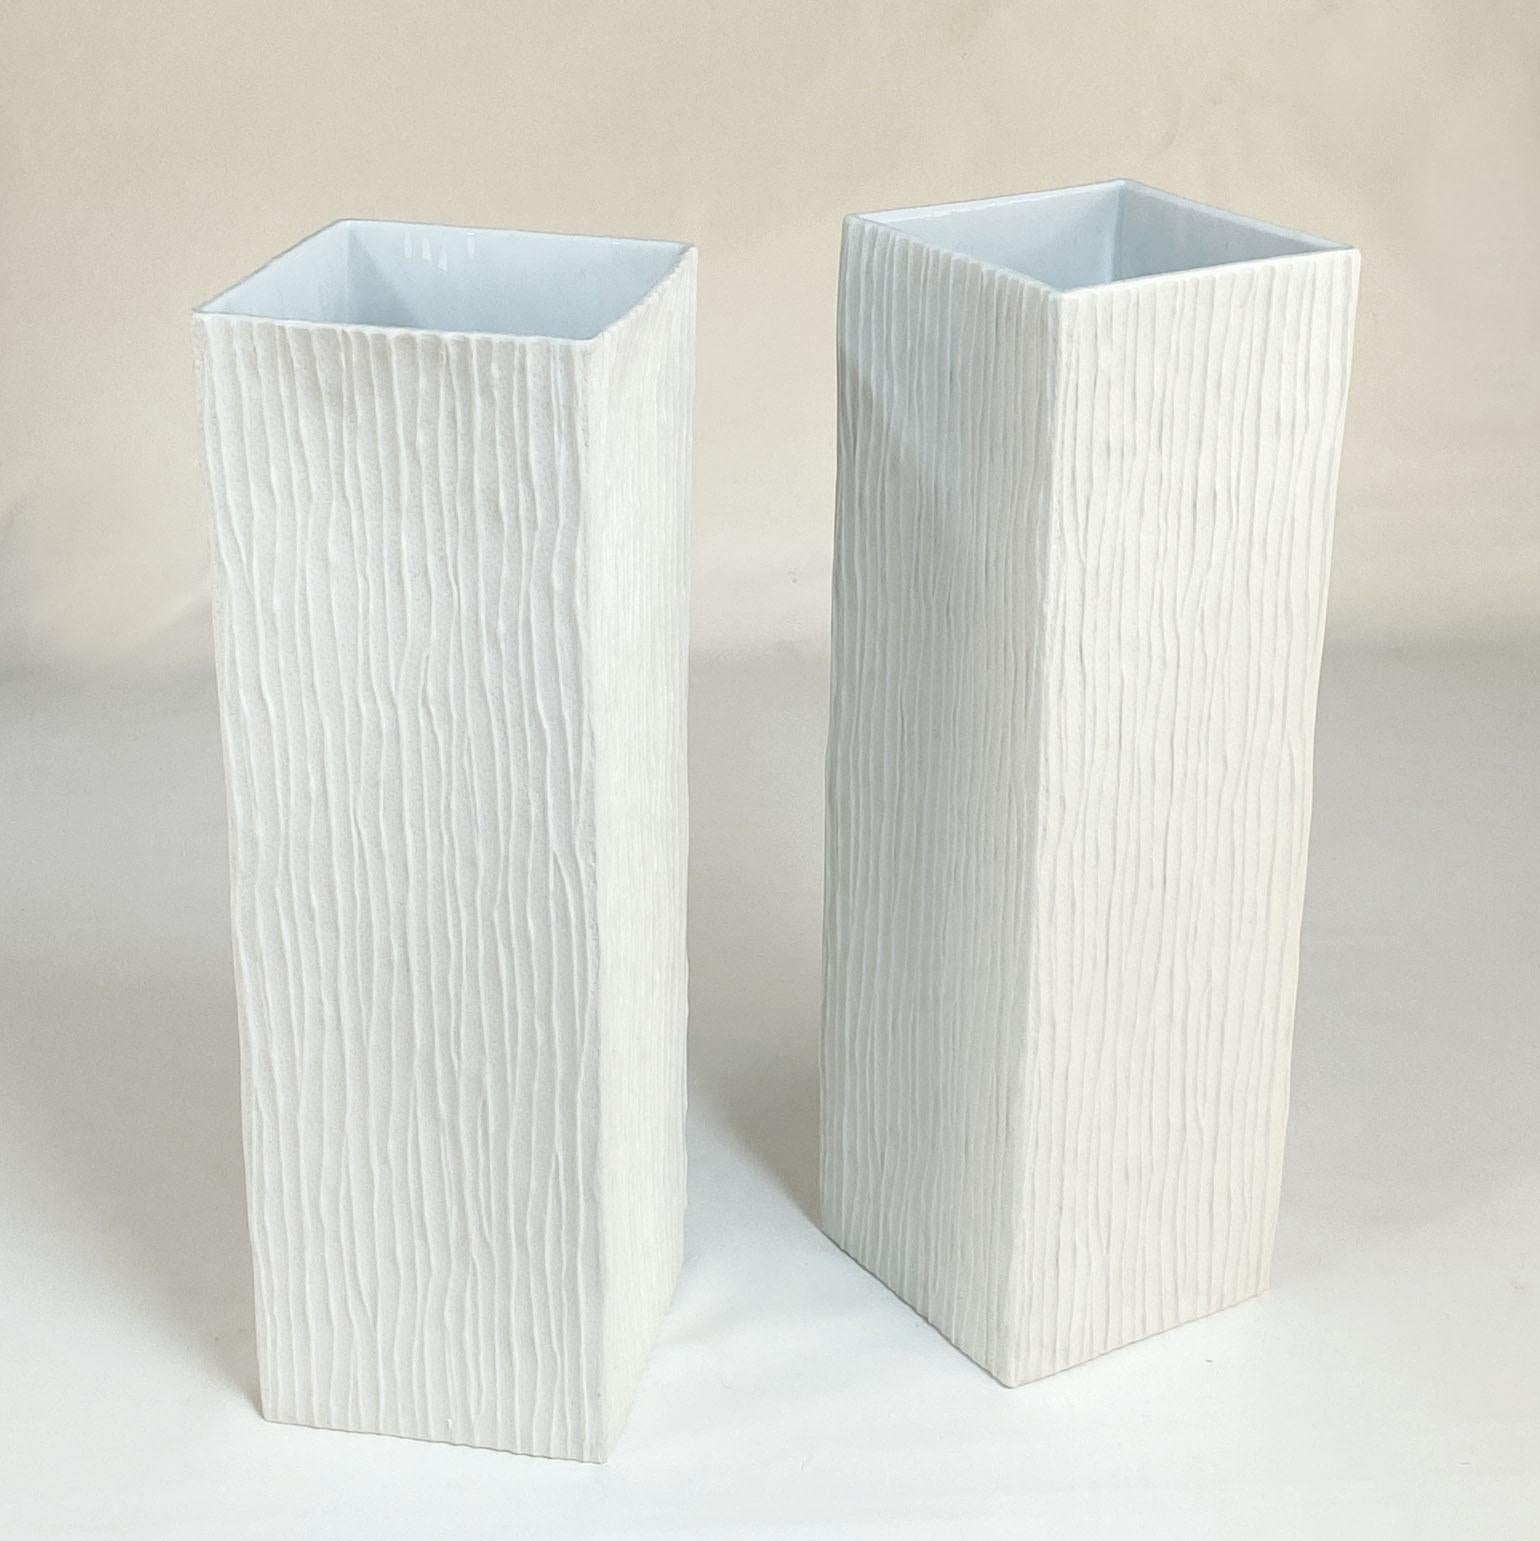 Pair of Large White Square Relief Vases by Hutschenreuther In Excellent Condition For Sale In London, GB